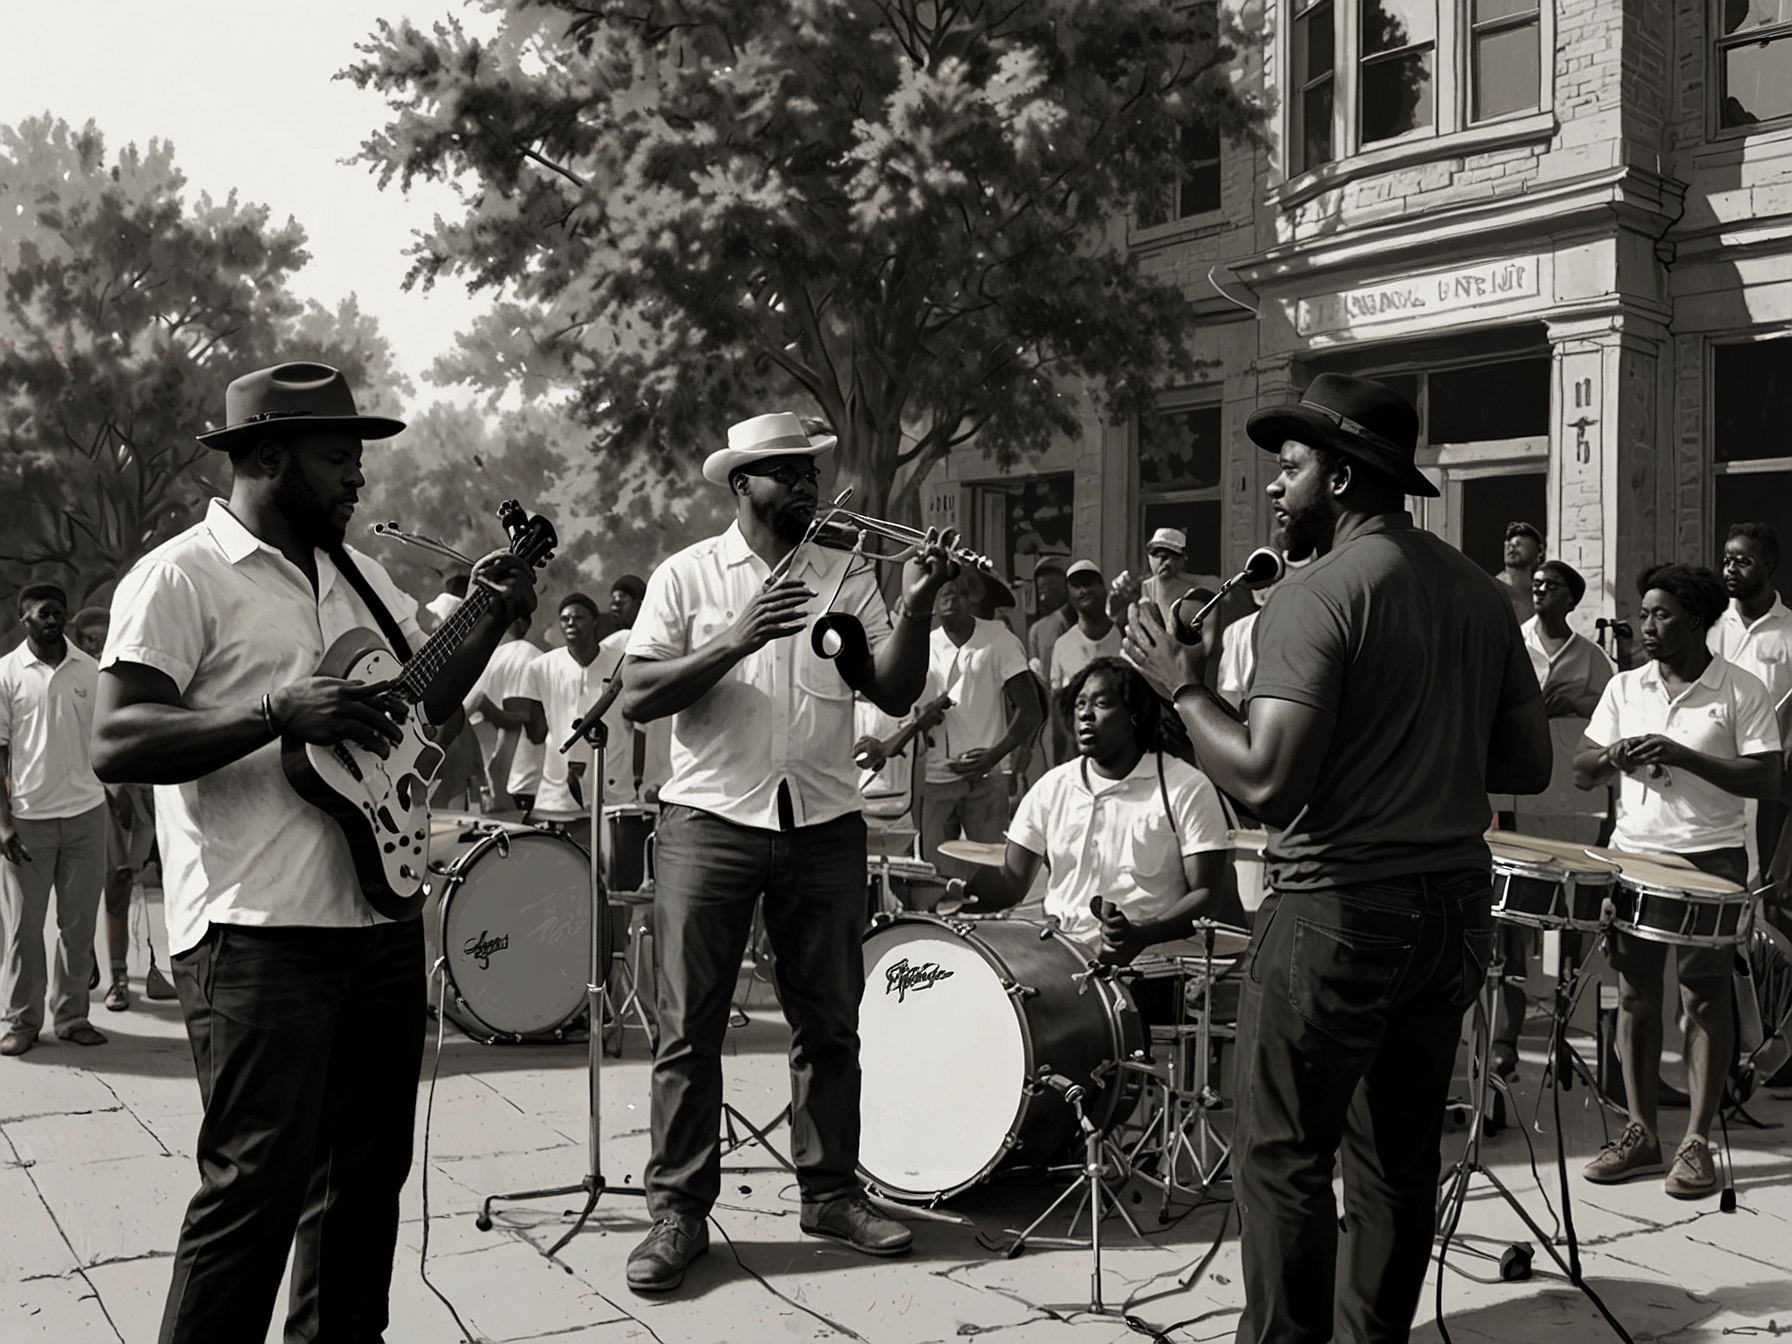 Live musical performance during a Juneteenth event in the Twin Cities, highlighting local musicians in action.